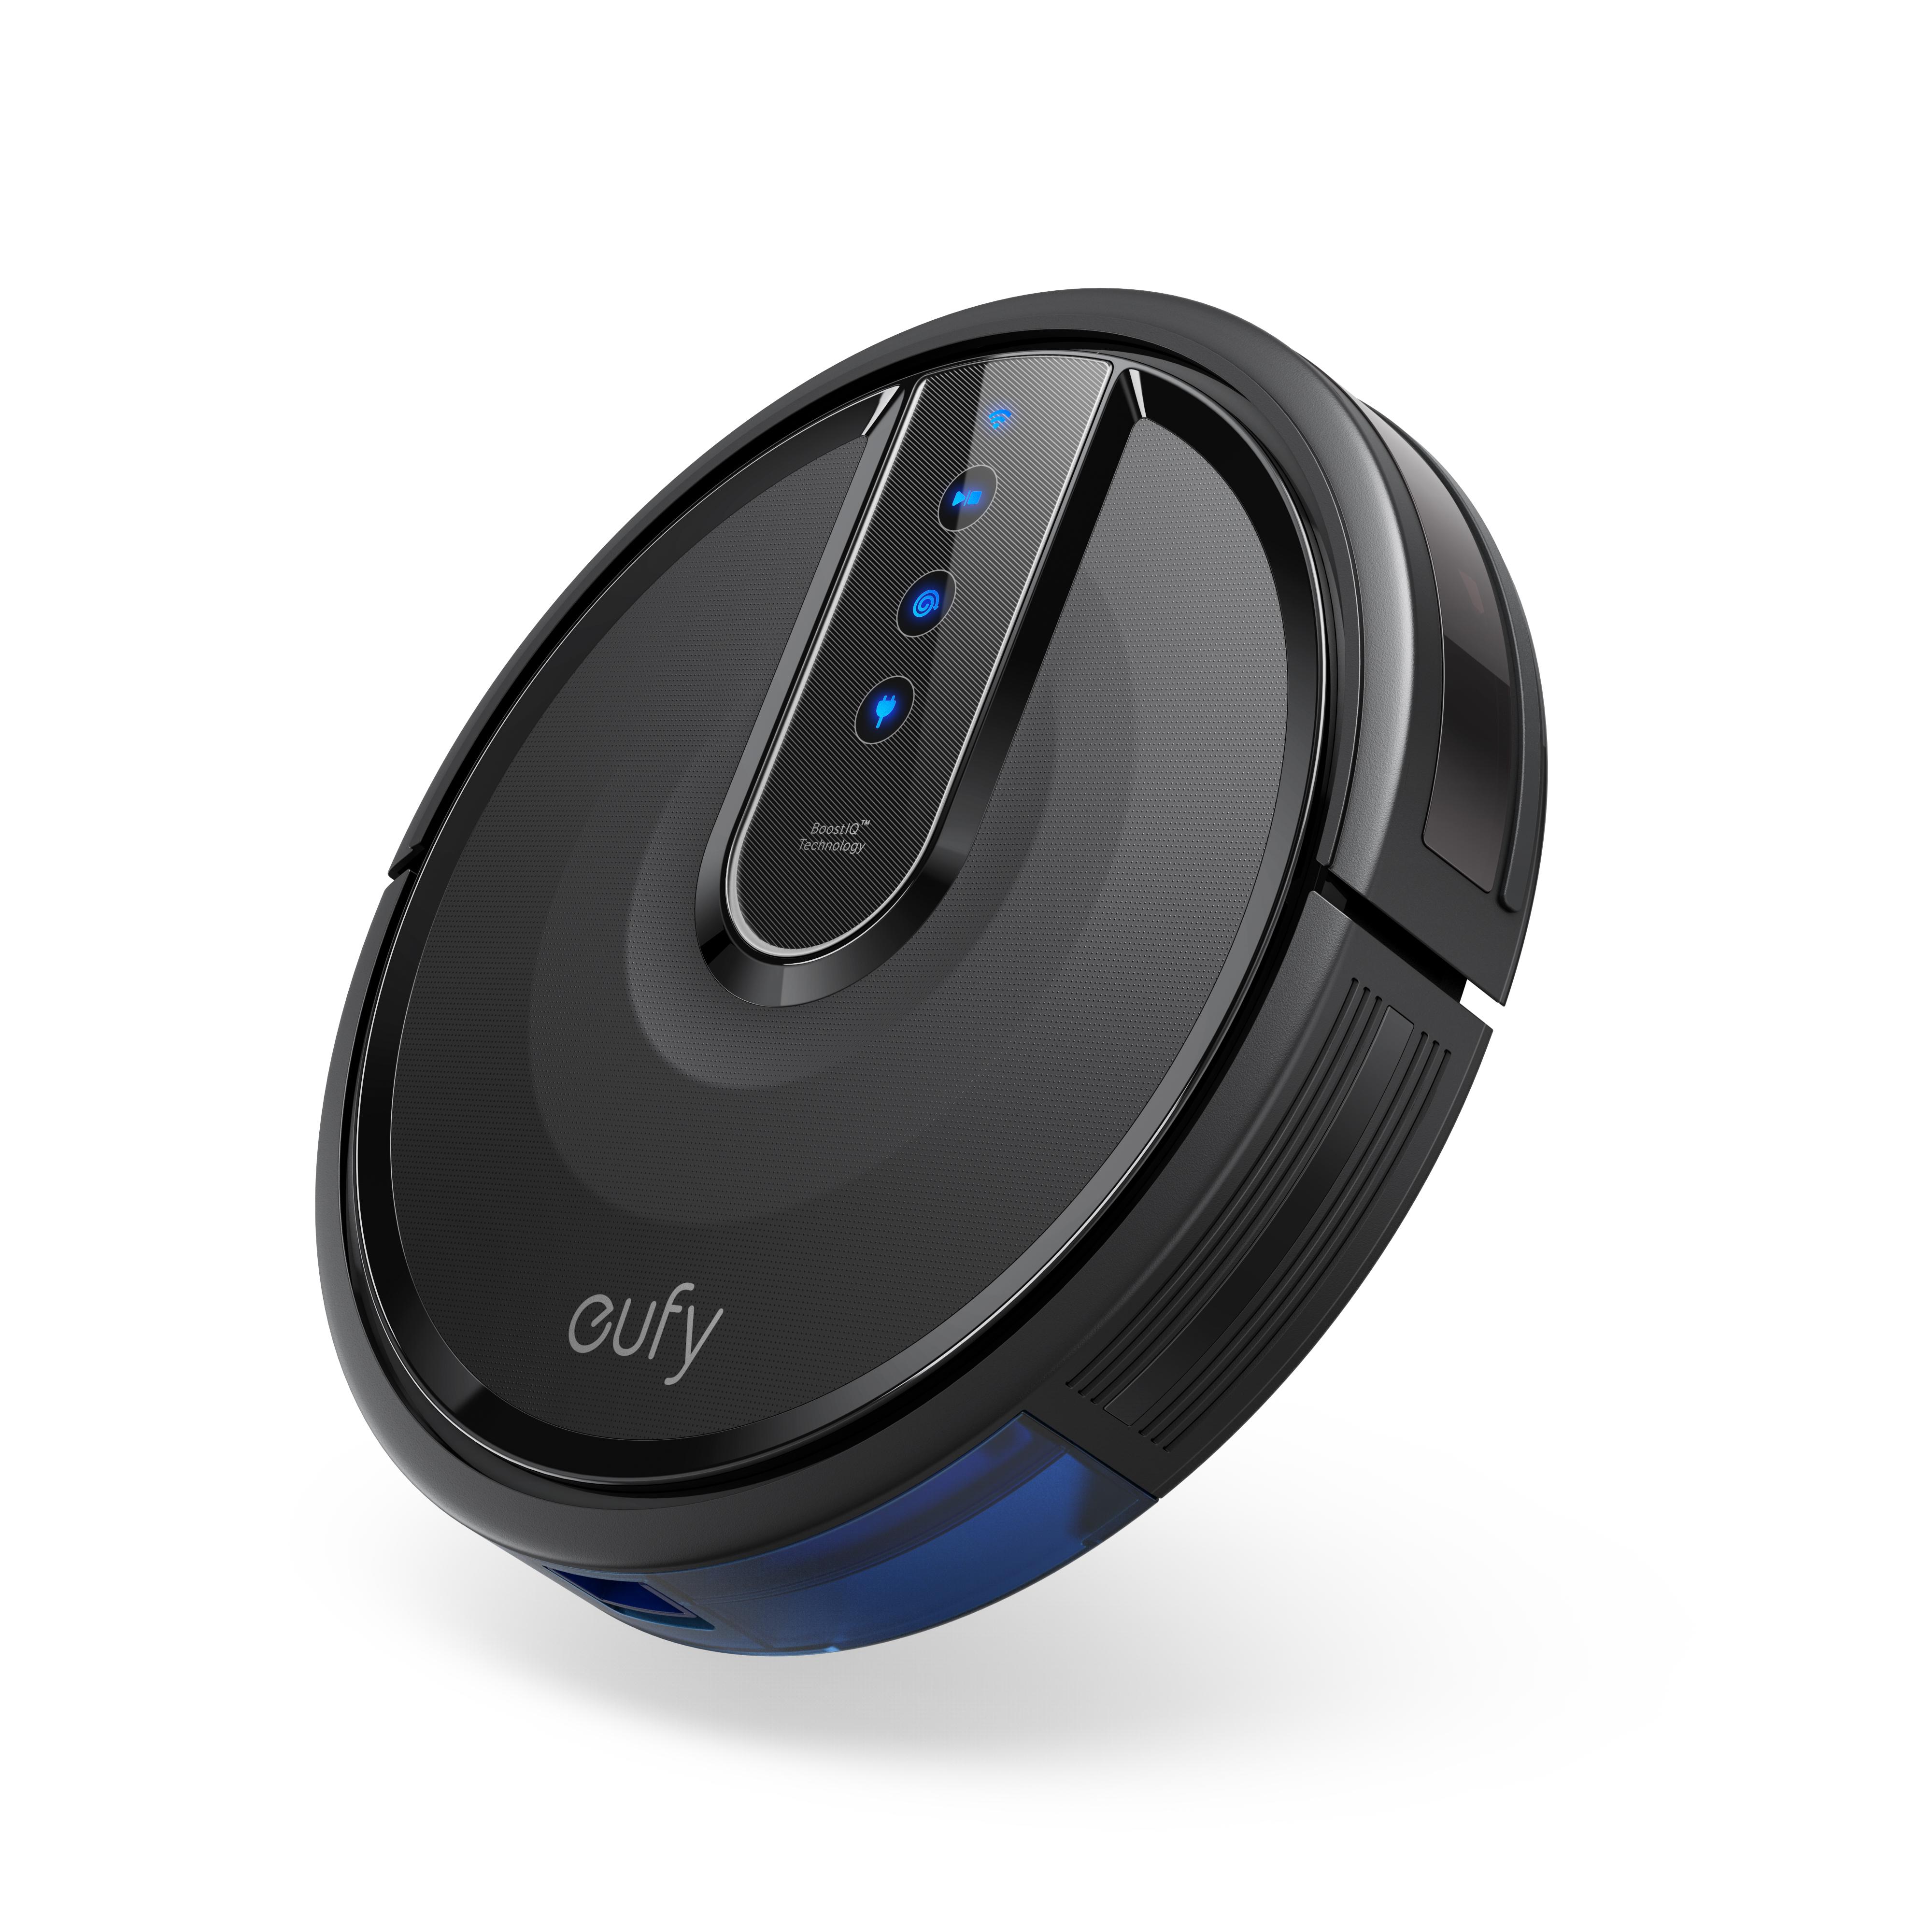 Anker eufy RoboVac 35C Wi-Fi Connected Robot Vacuum - image 5 of 9